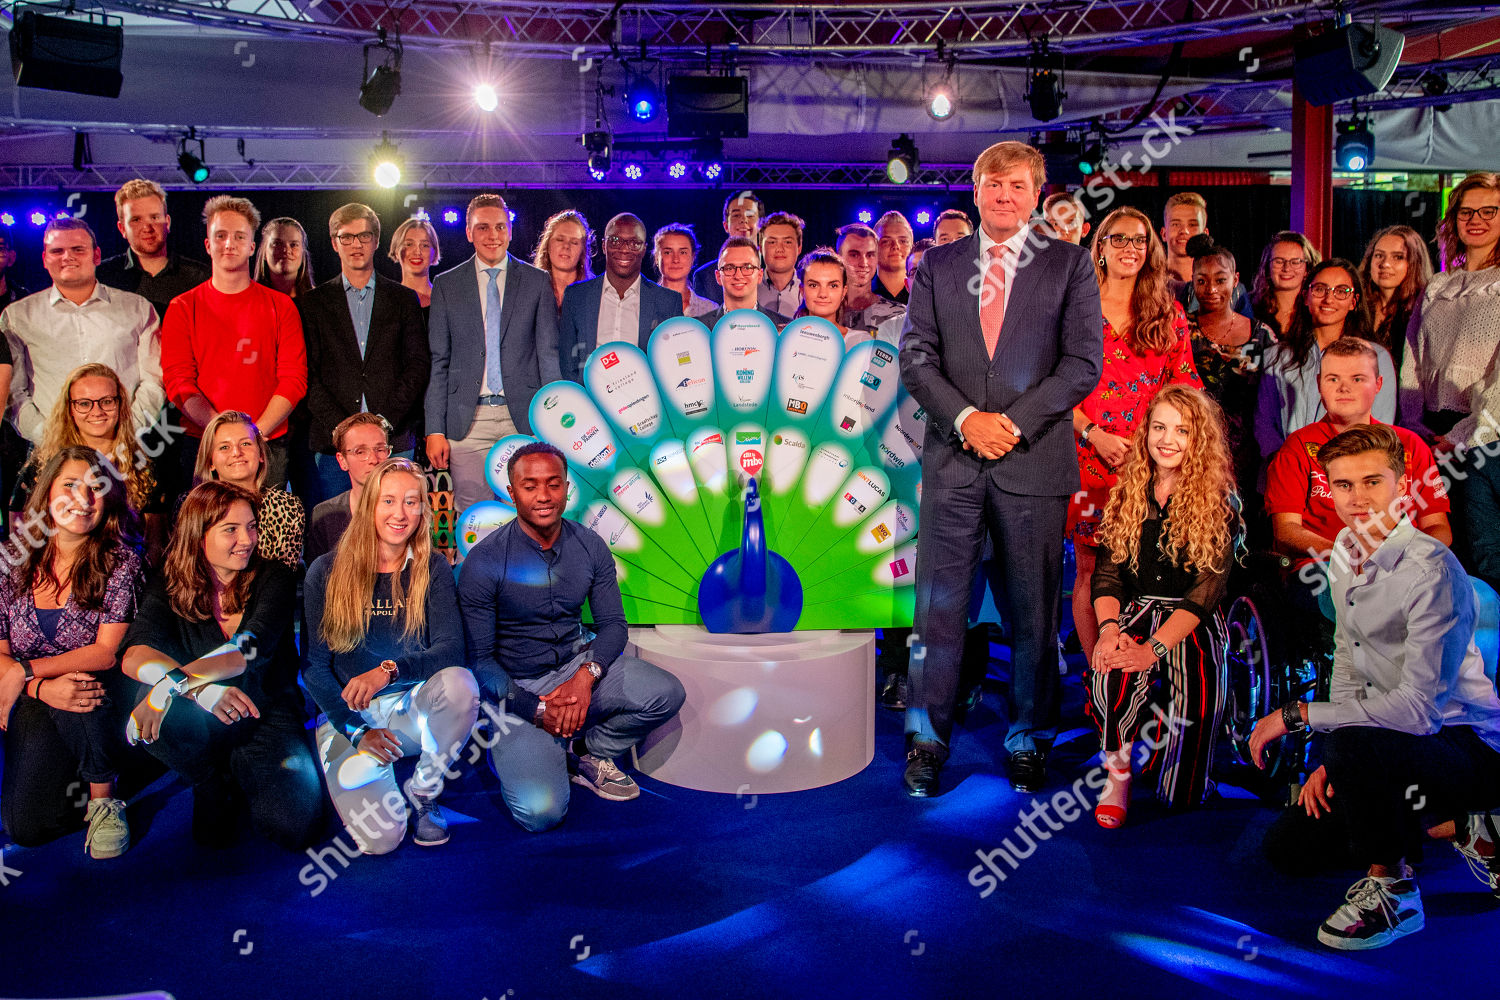 opening-of-new-academic-year-of-mbo-at-roc-tilburg-netherlands-shutterstock-editorial-9808902n.jpg